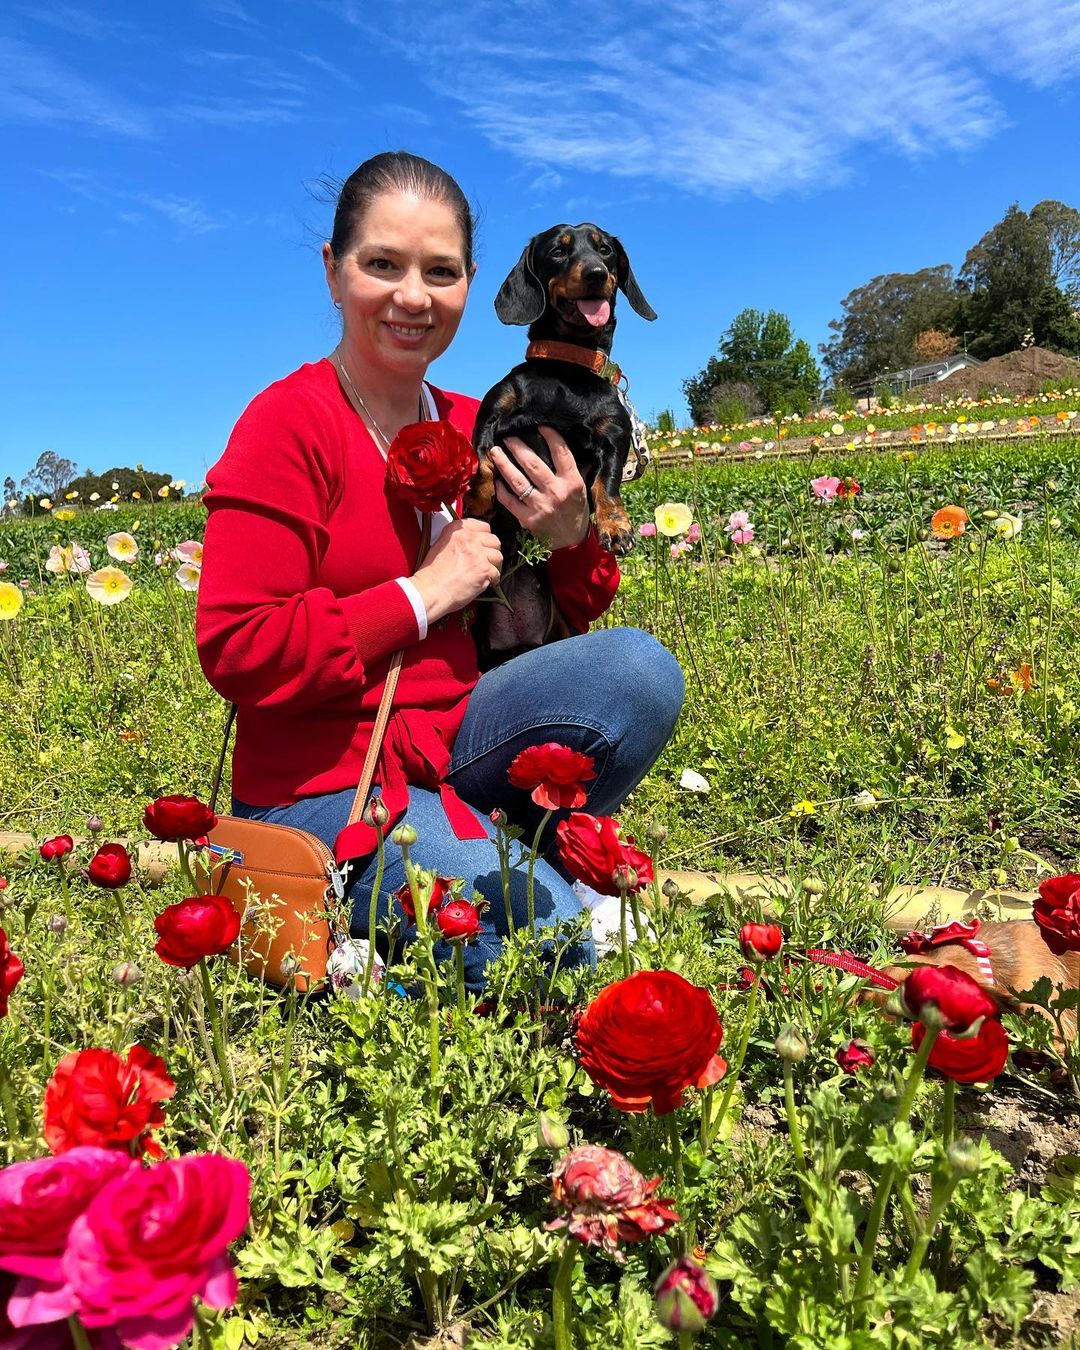 Annalisa with her black n tan dachshund in a field of flowers